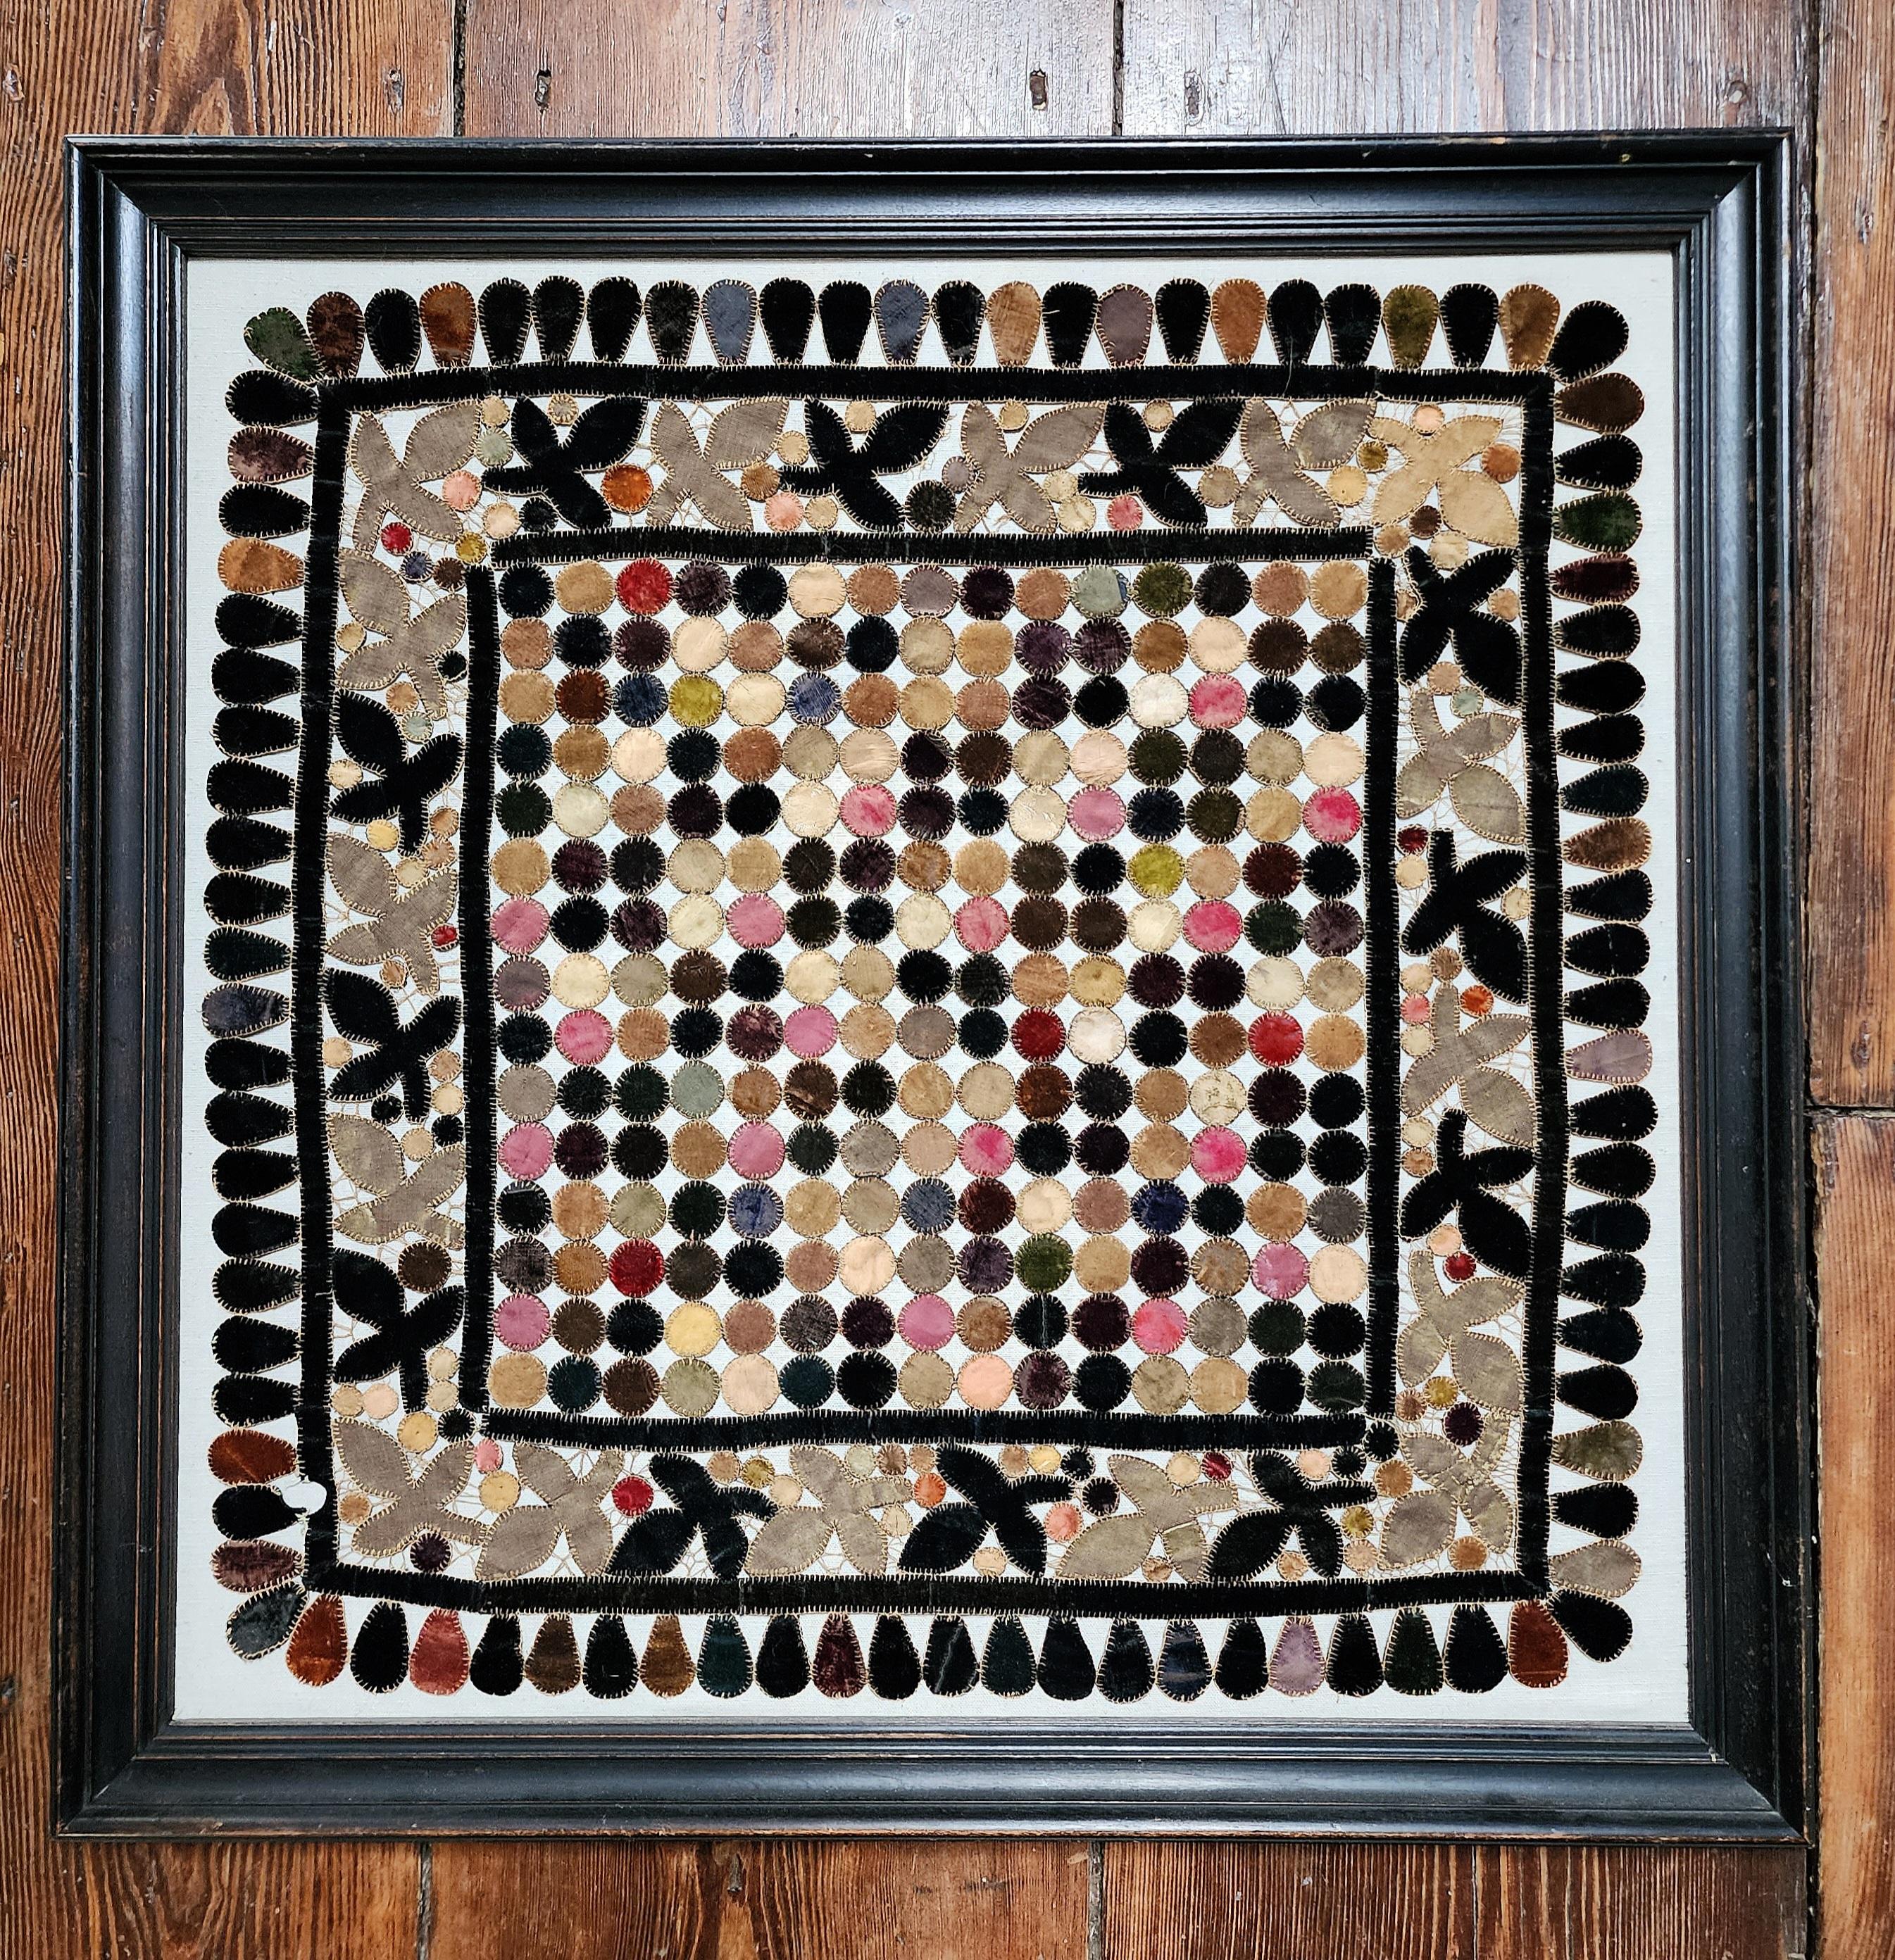 Hand-Crafted 19th Century American Penny Table Rug 